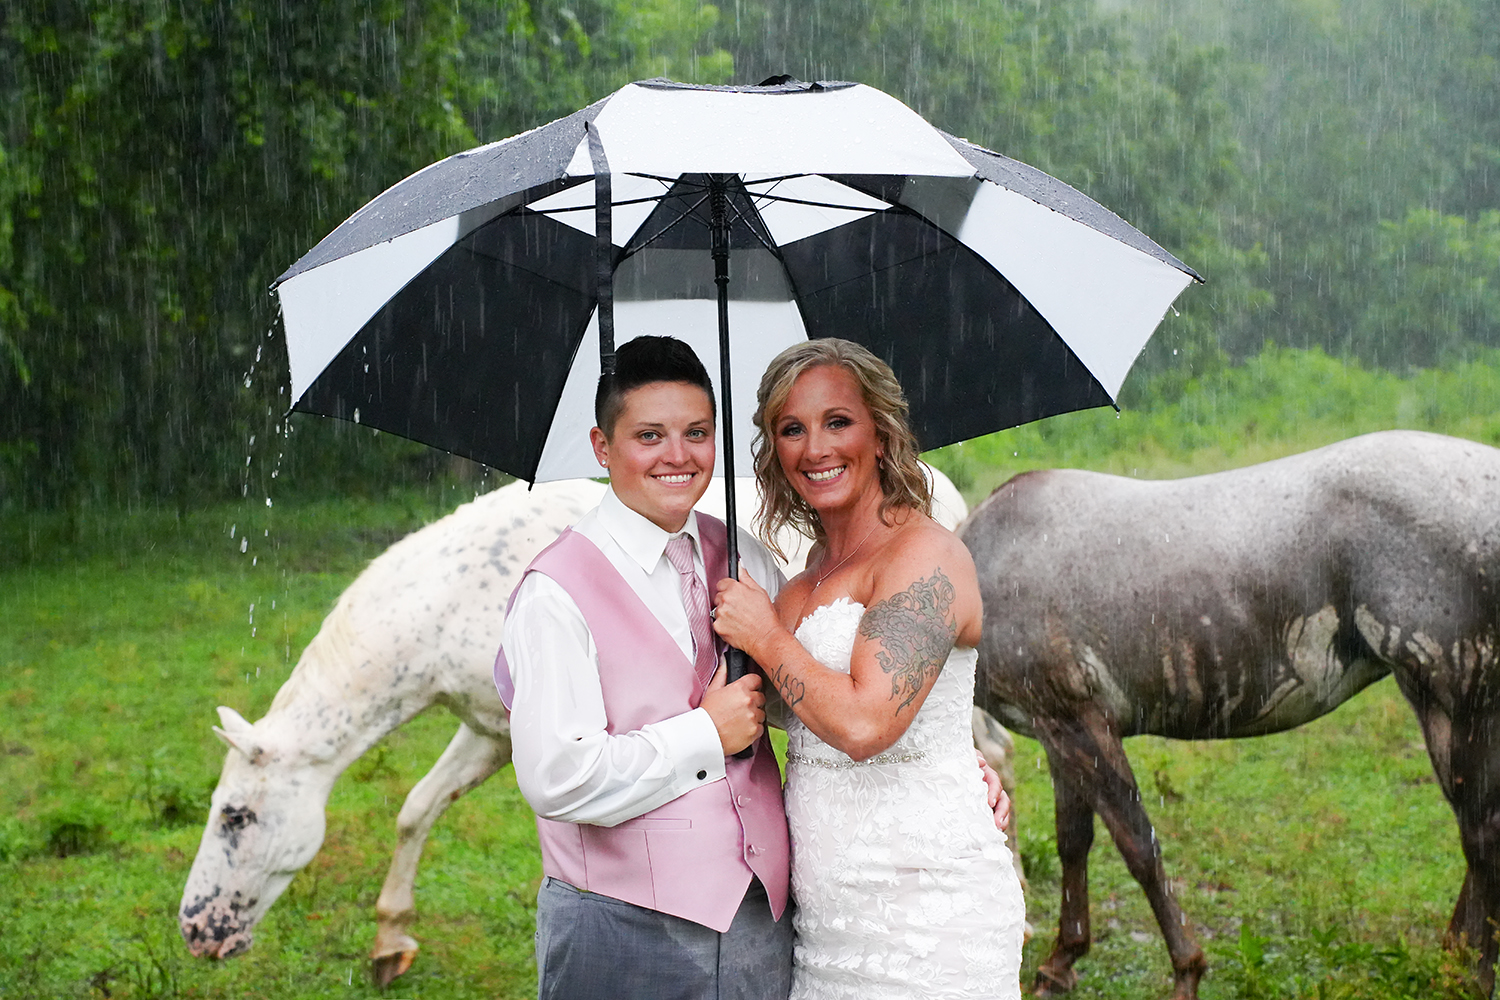 Two brides holding an umbrella in the rain in a field with two horses